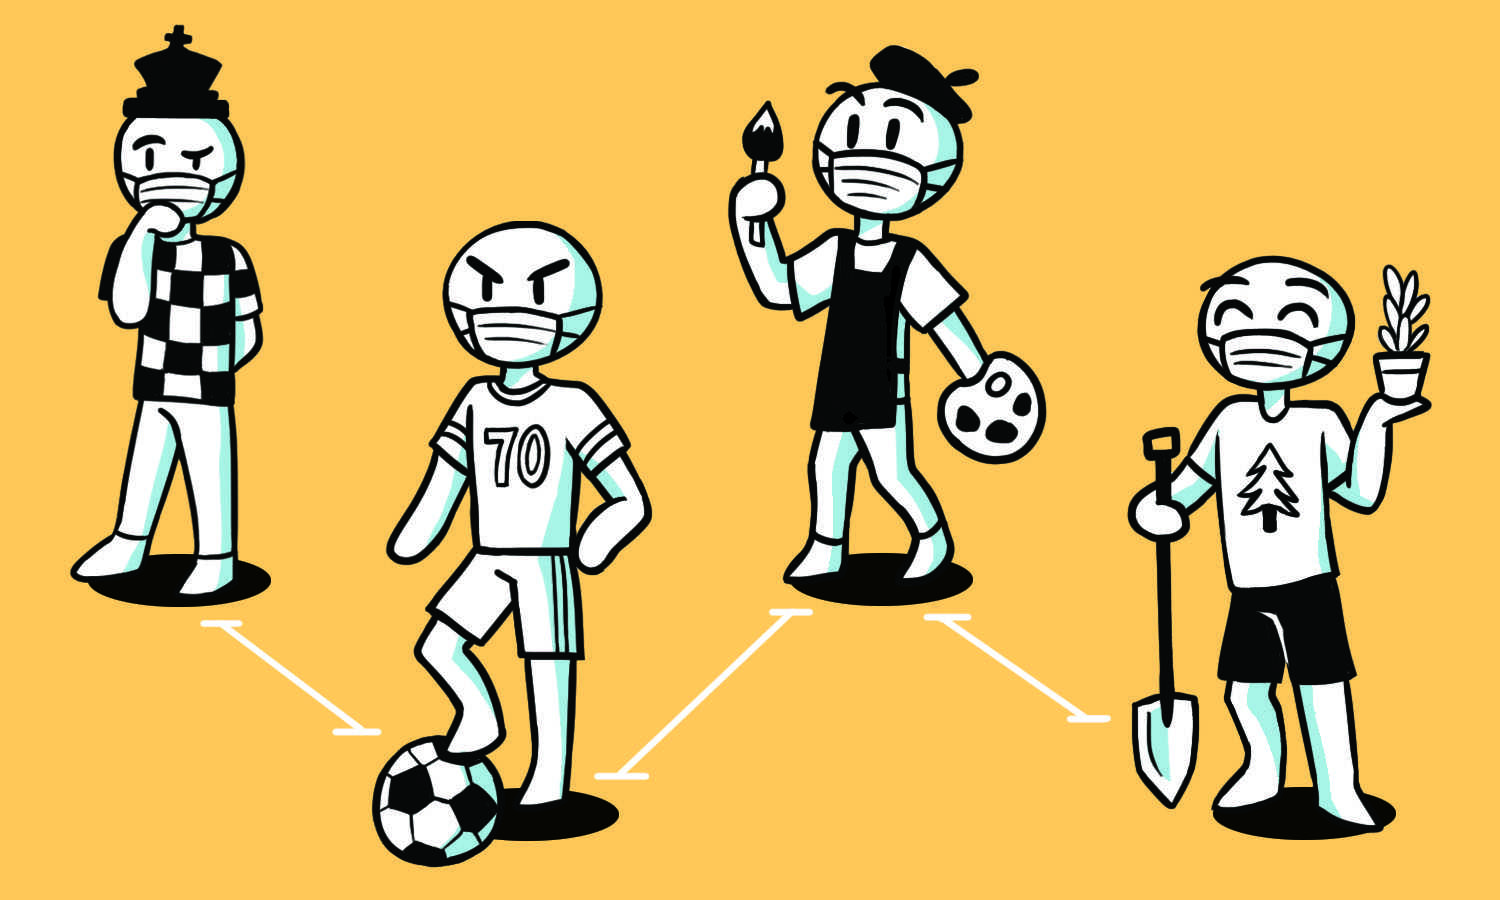 Graphic illustration depicting four figures representing clubs (chess, soccer, painting, and gardening) standing six feet apart